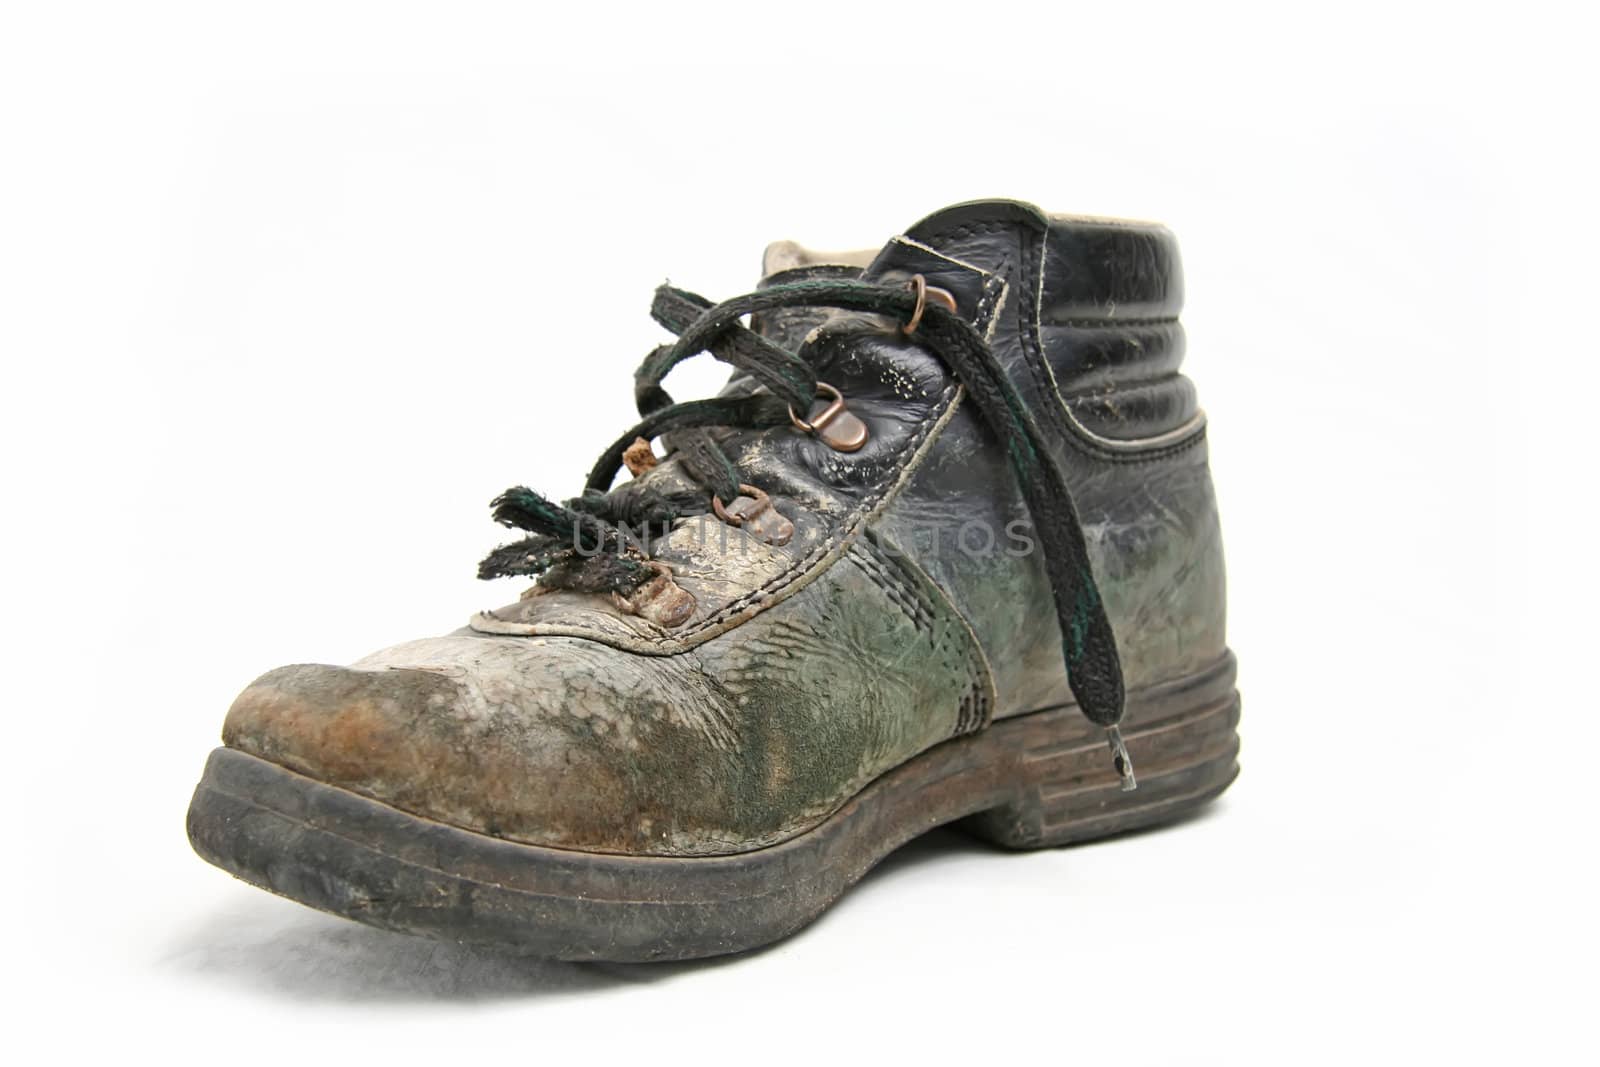 Dirty old brown pigskin leather work boot, very worn, with metal reinforcements to the sole